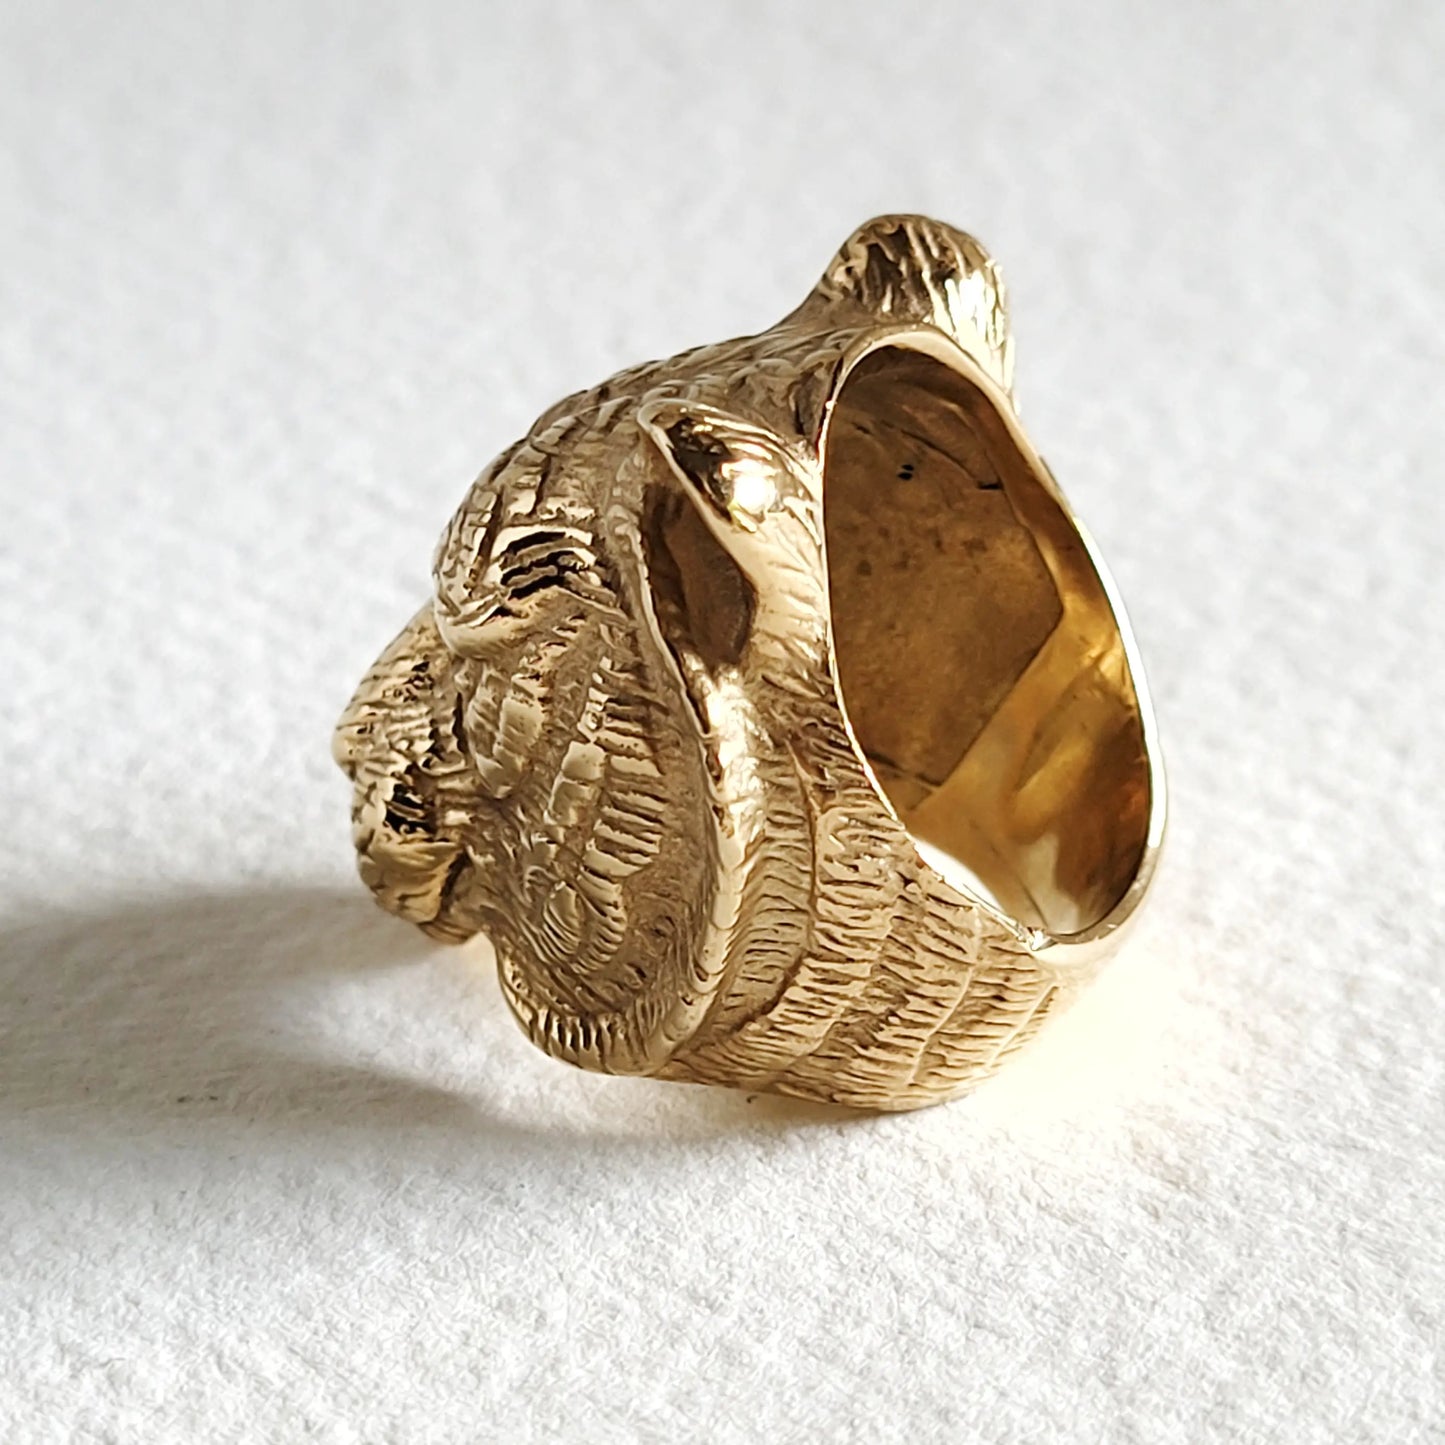 Tiger Lion Animal Ring 18 kt Gold Plated Size 9 - Moon Room Shop and Wellness